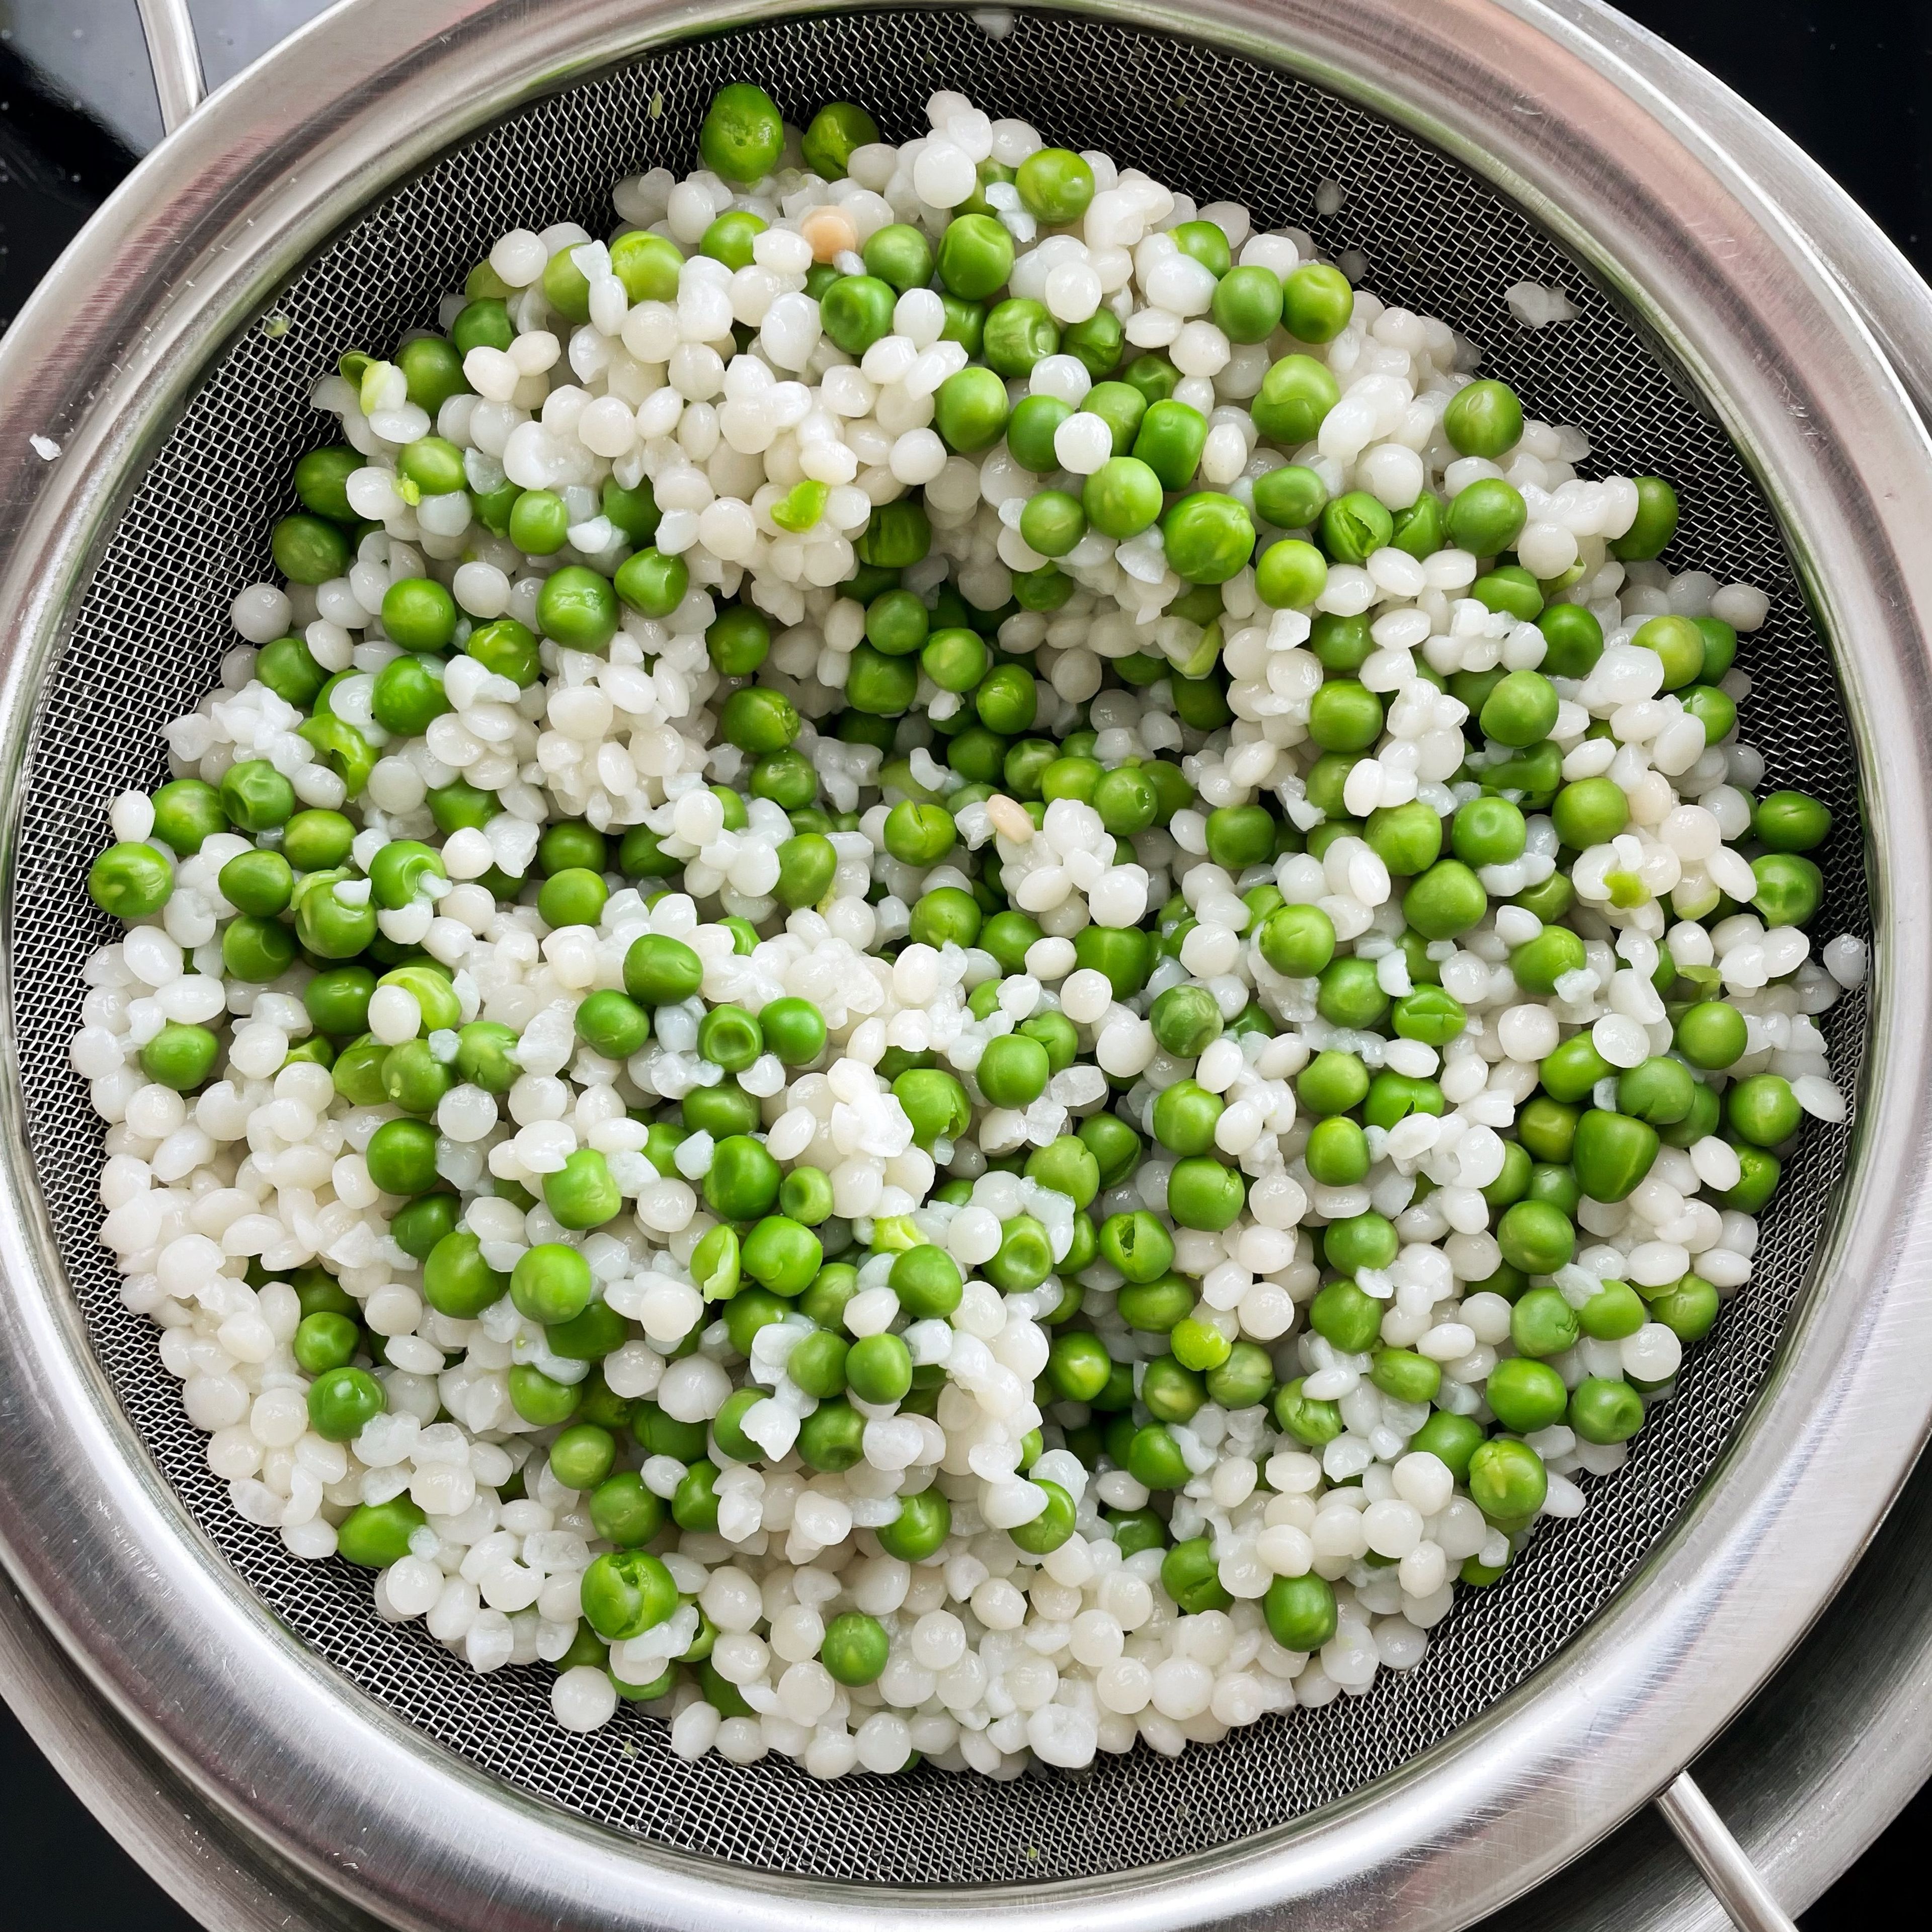 Cook the Israeli couscous in salted water according to the package instructions until al dente. Right before the end of the cooking time, add the peas and cook for another minute. Then rinse under cold water.